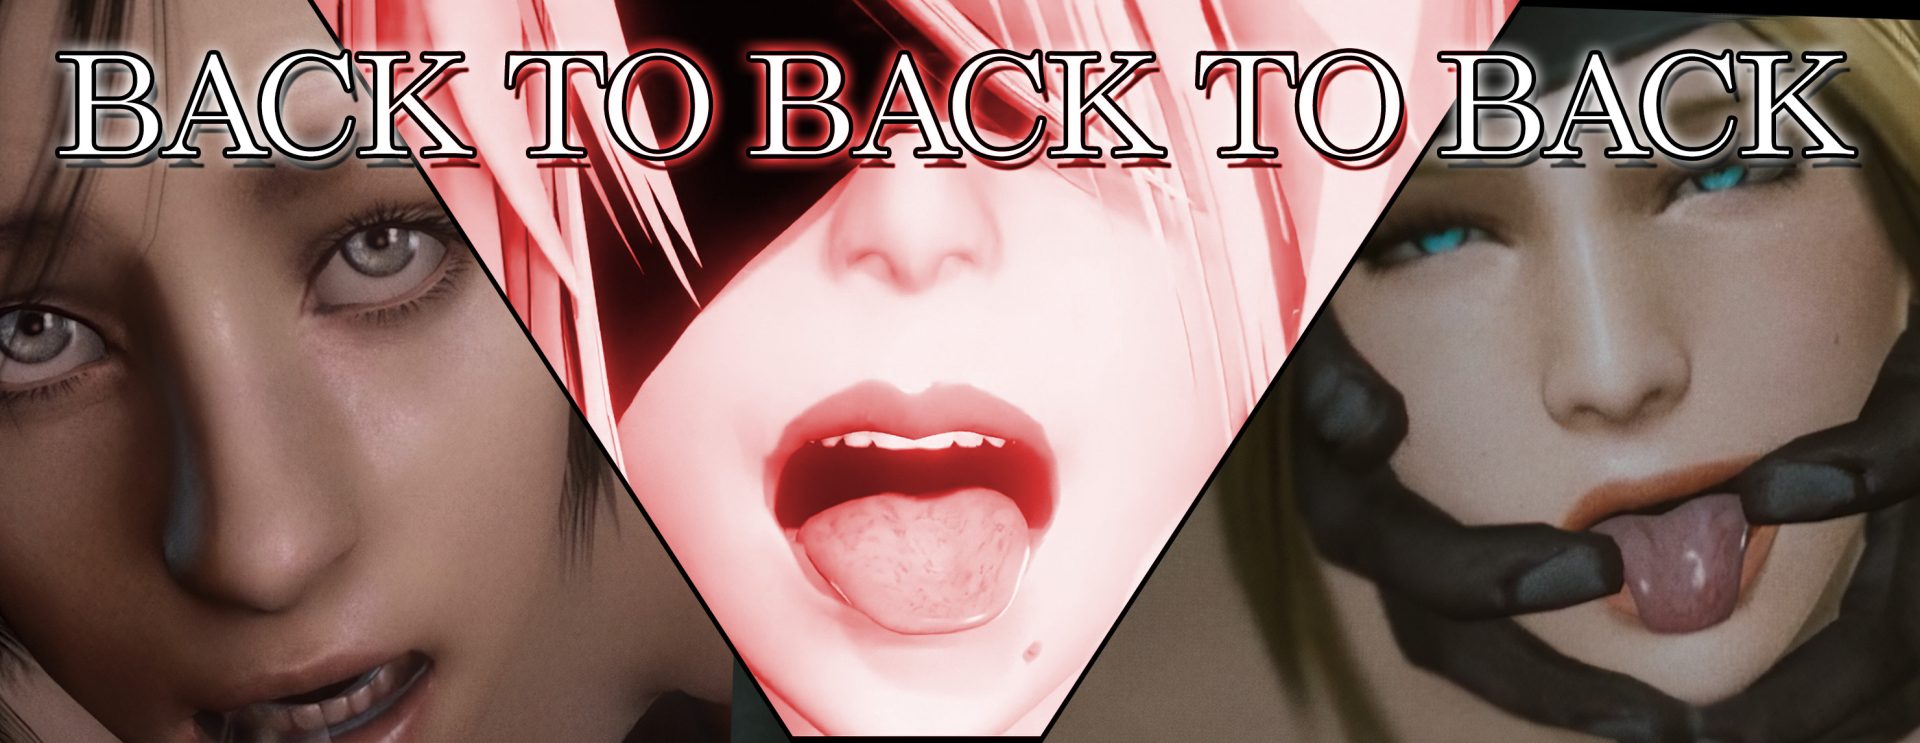 [ATHMV] (3D) StudioFOW – Back to Back to Back